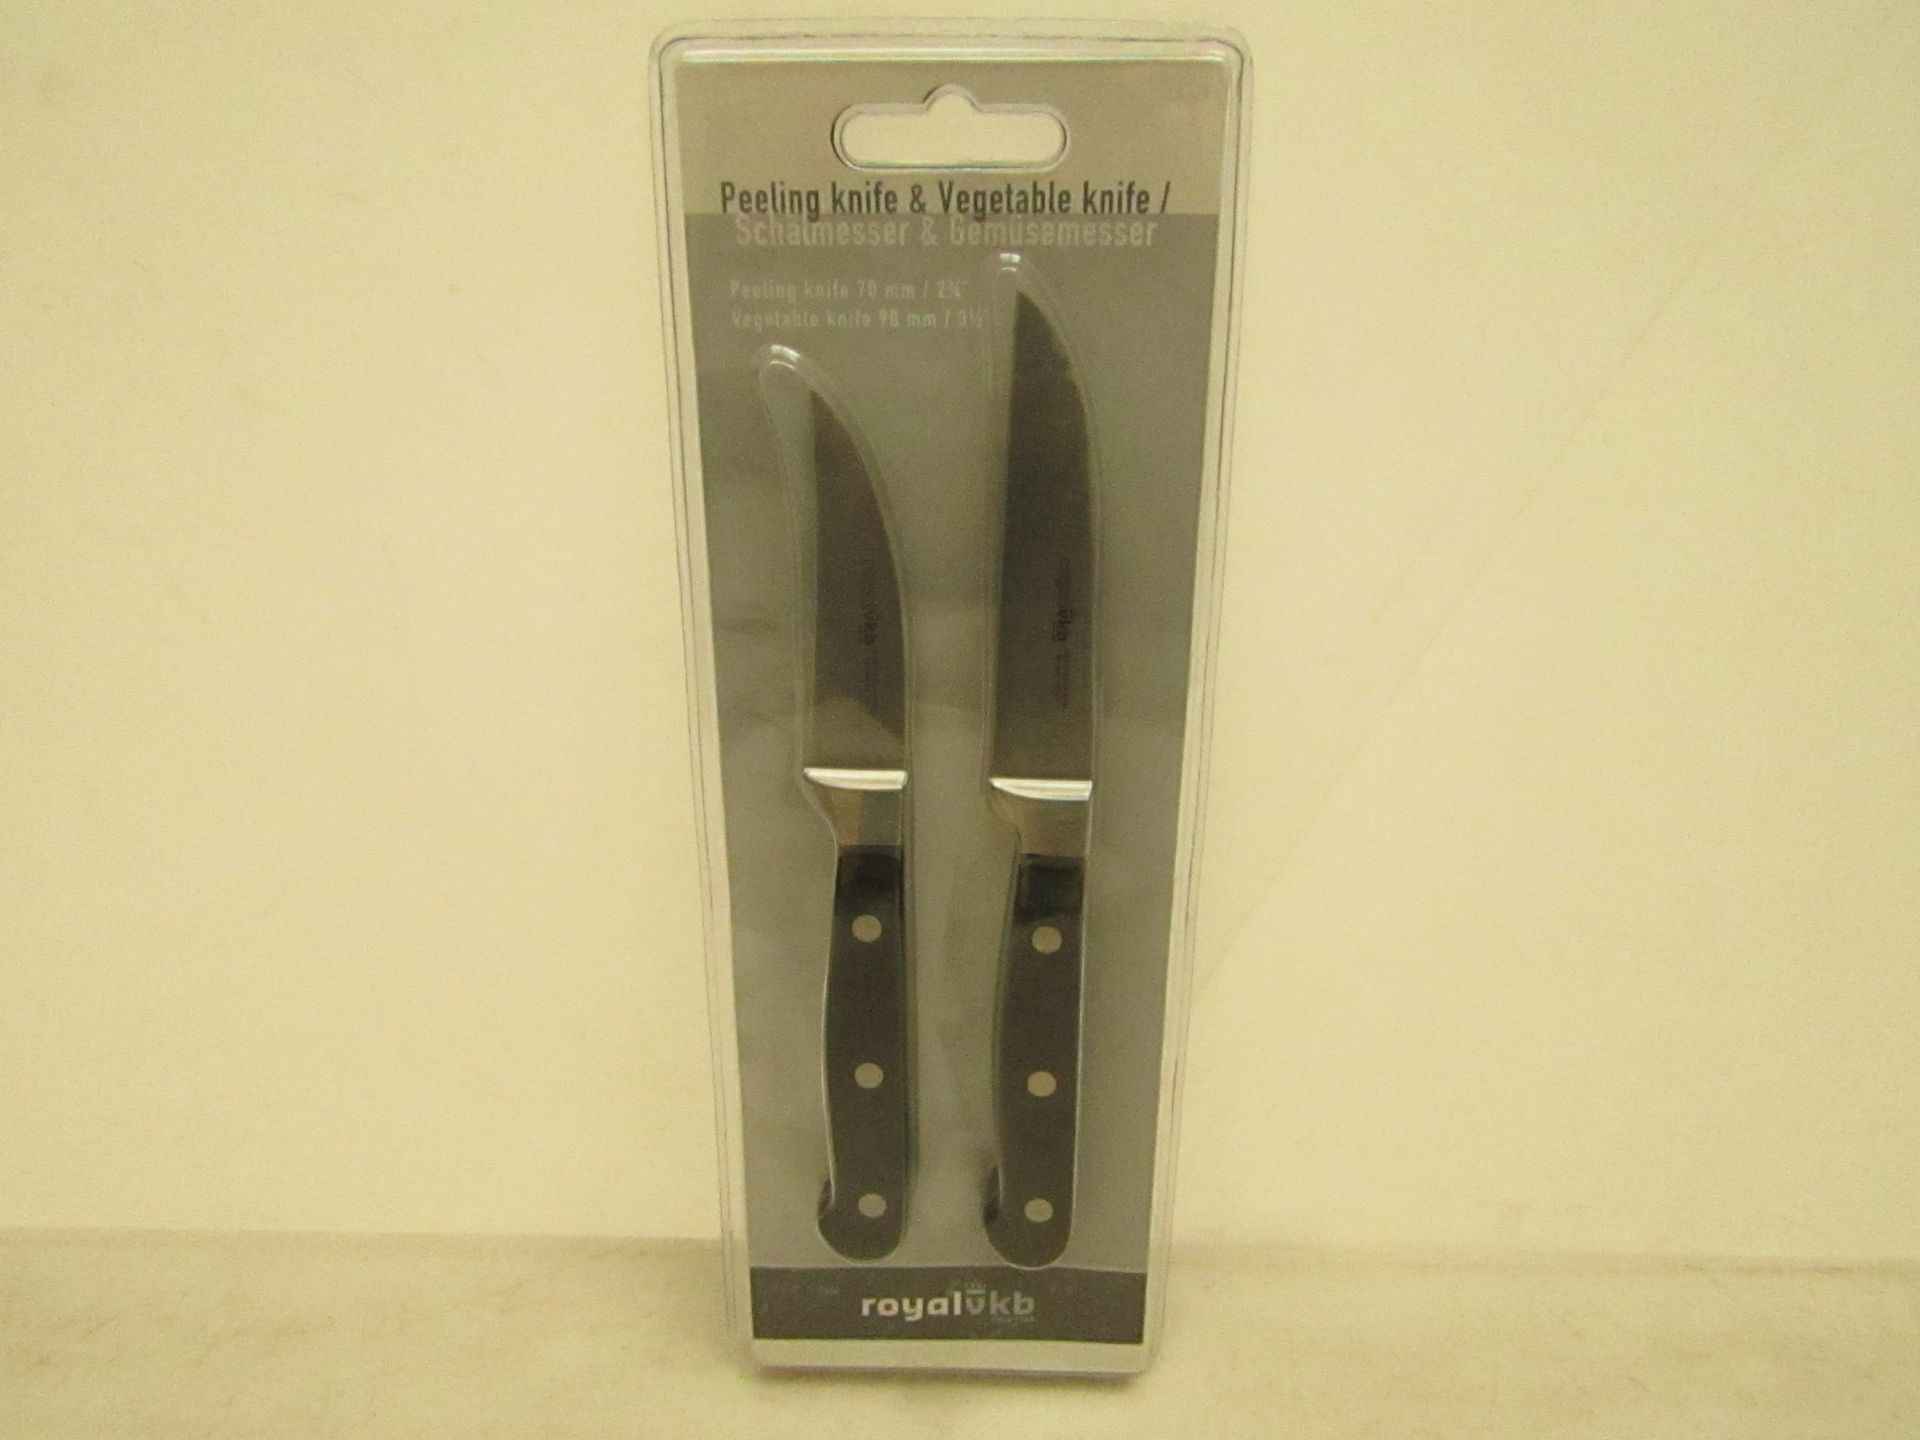 RoyalVKB peeling knife and vegetable knife, new and packaged.